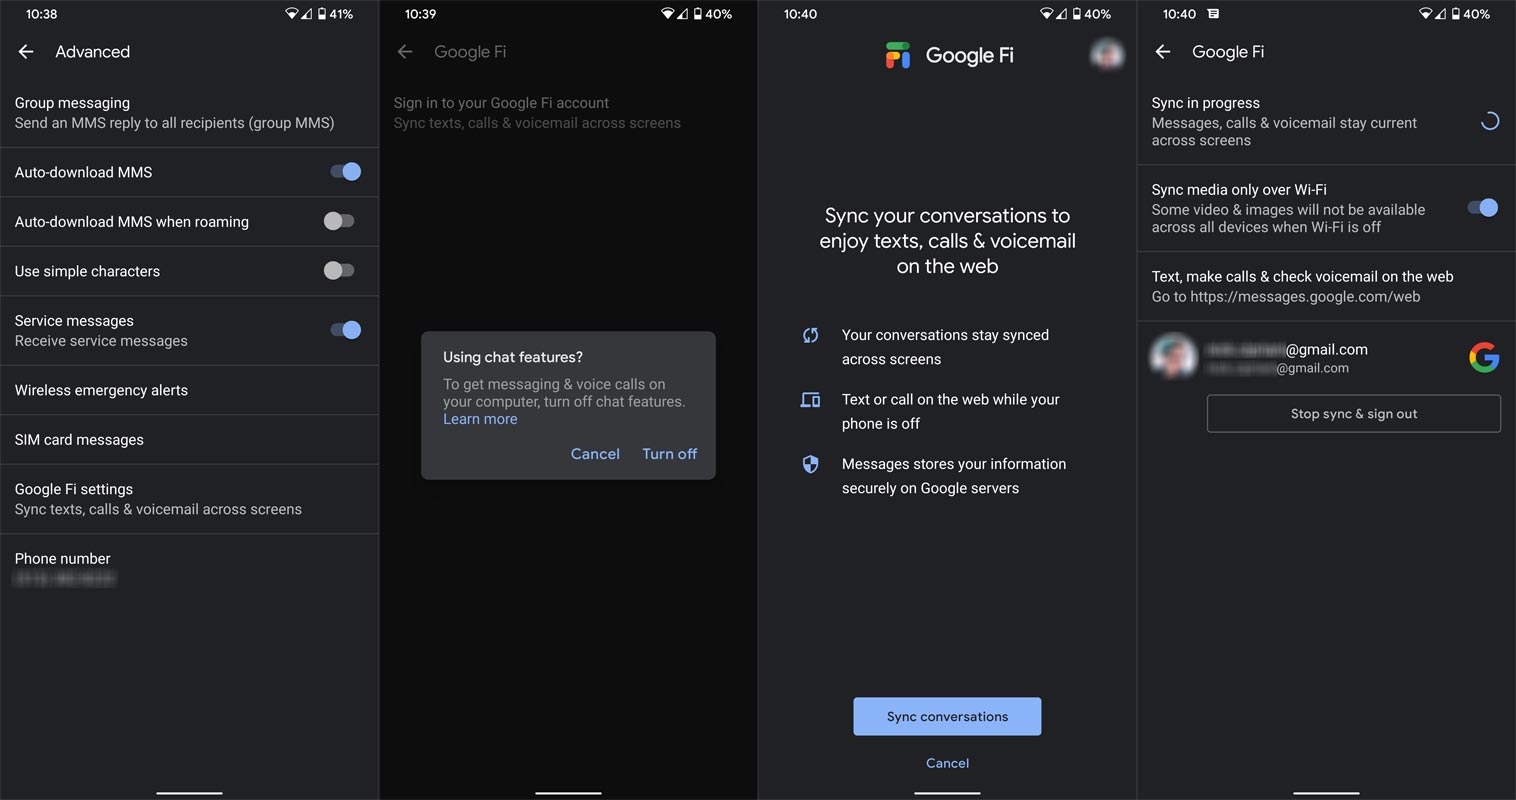 Google Fi Messages Sync with Account